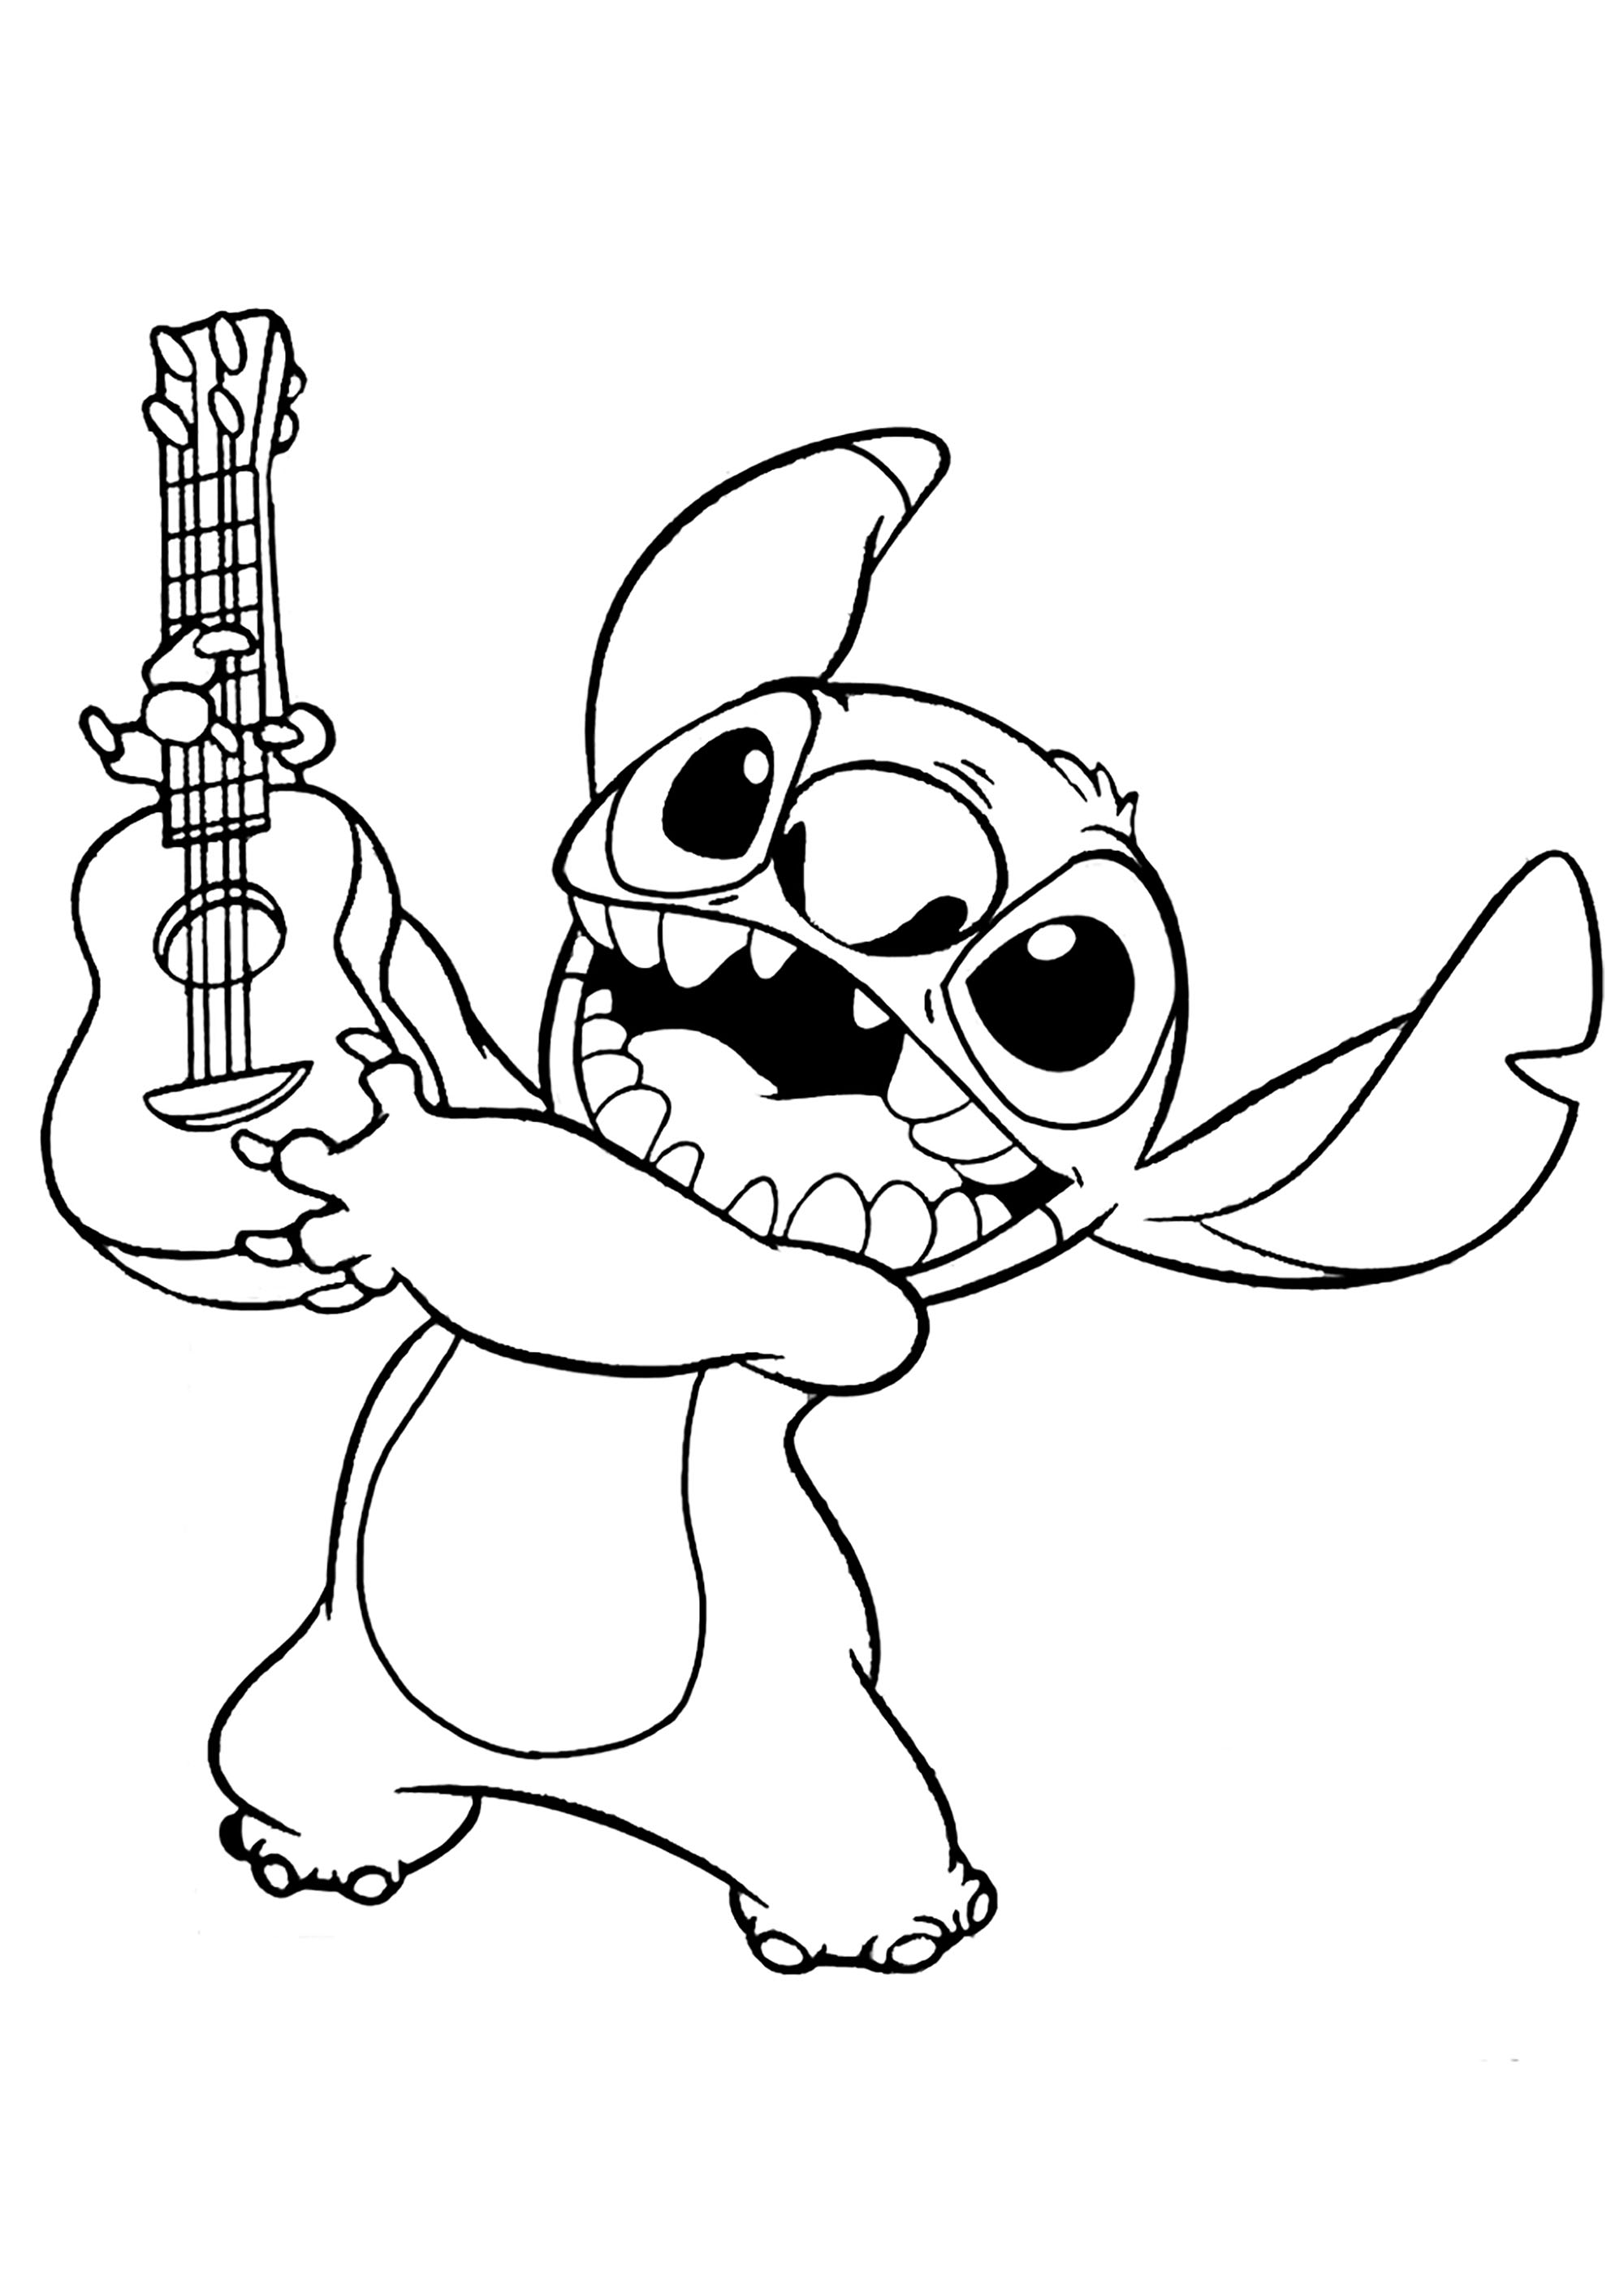 Fun coloring pages Lilo and Stitch to print and color